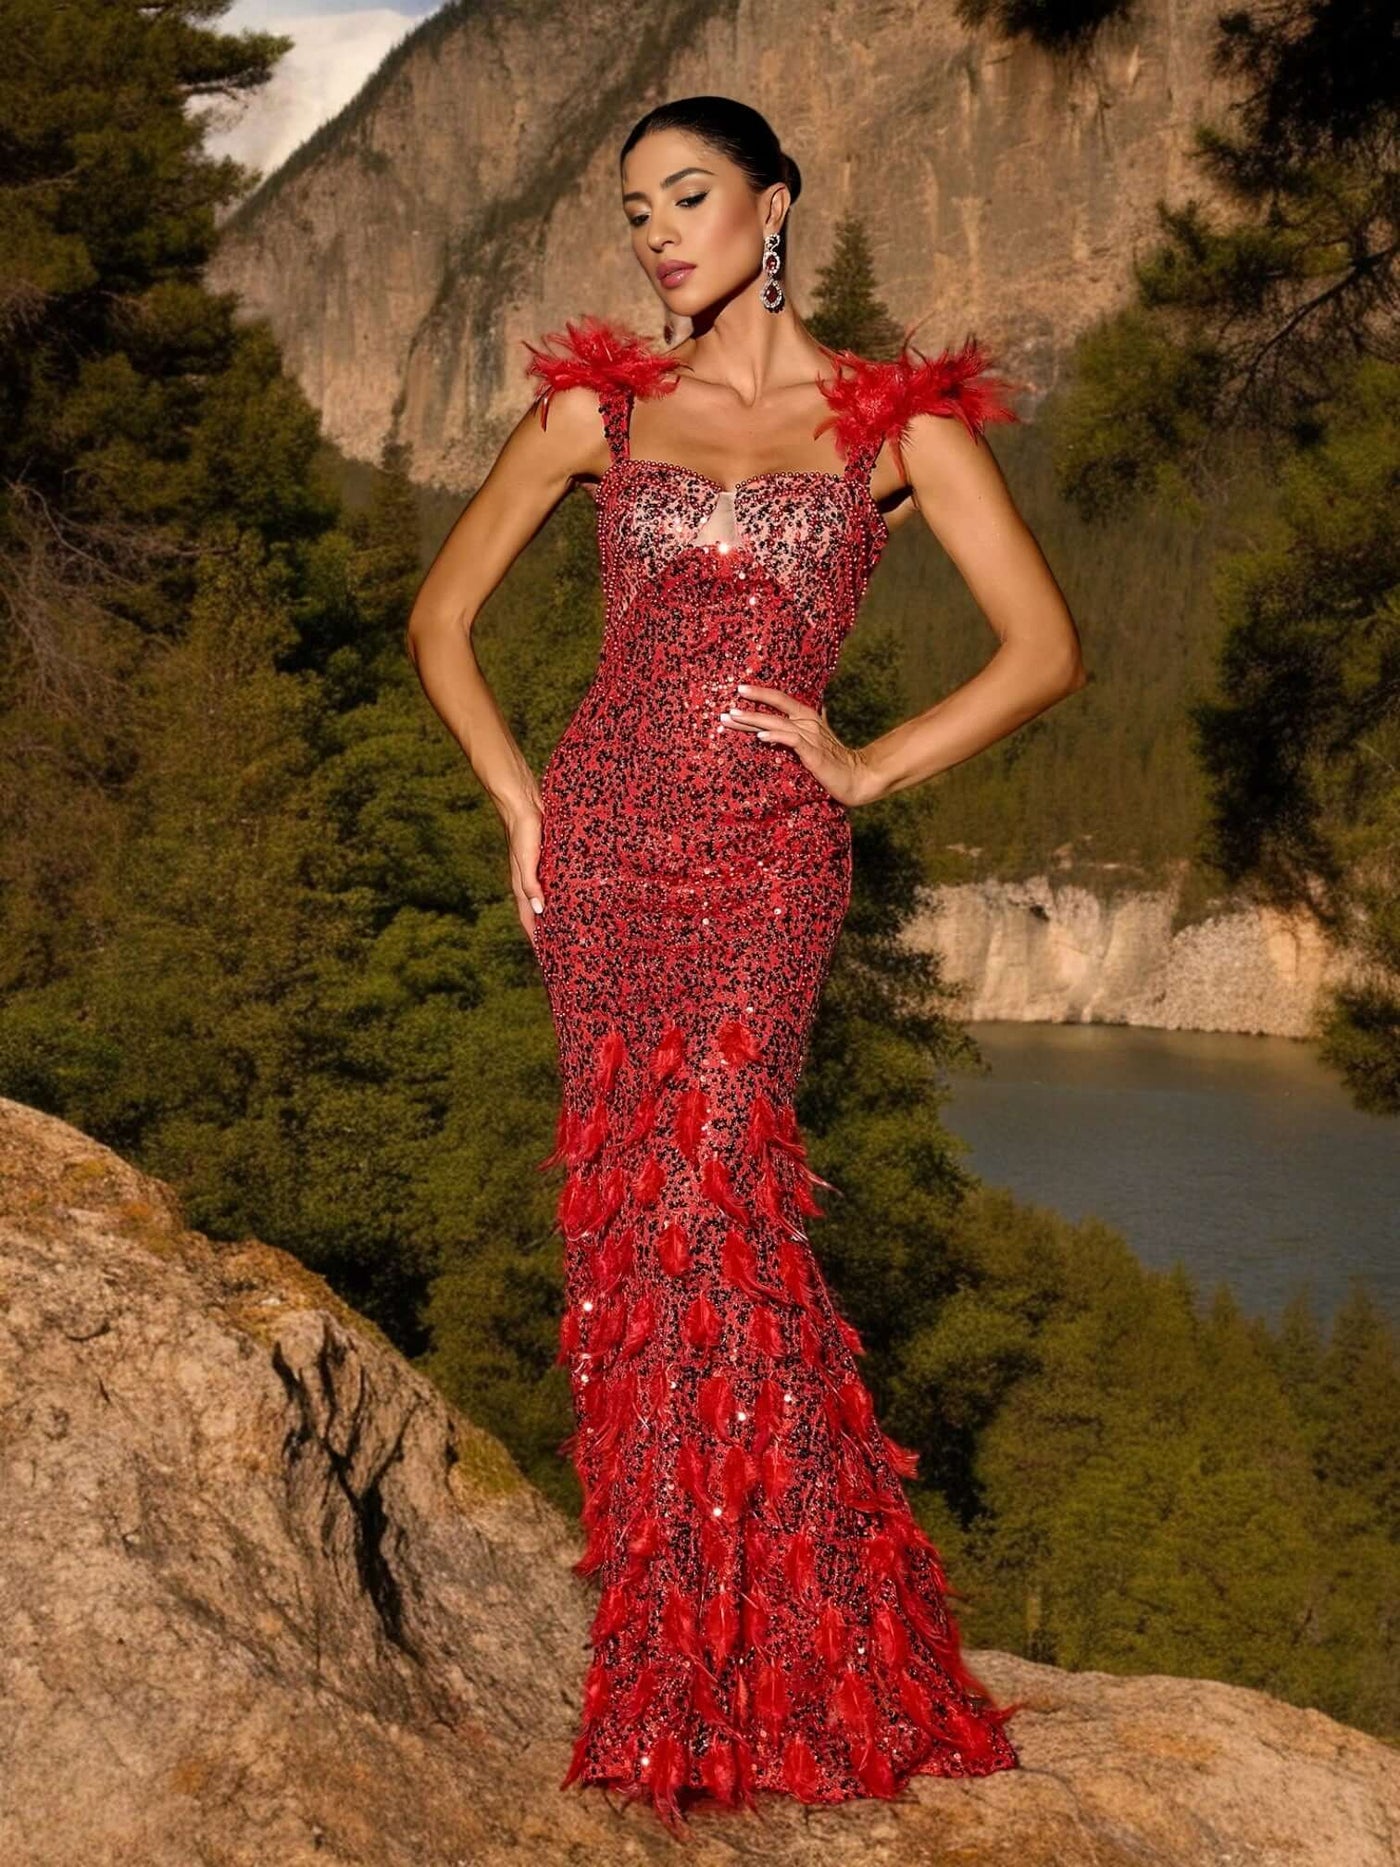 Model wearing Red Glitter Sequins Maxi Dress by Valensia Seven, posing in outdoor nature setting with forest and mountain background.